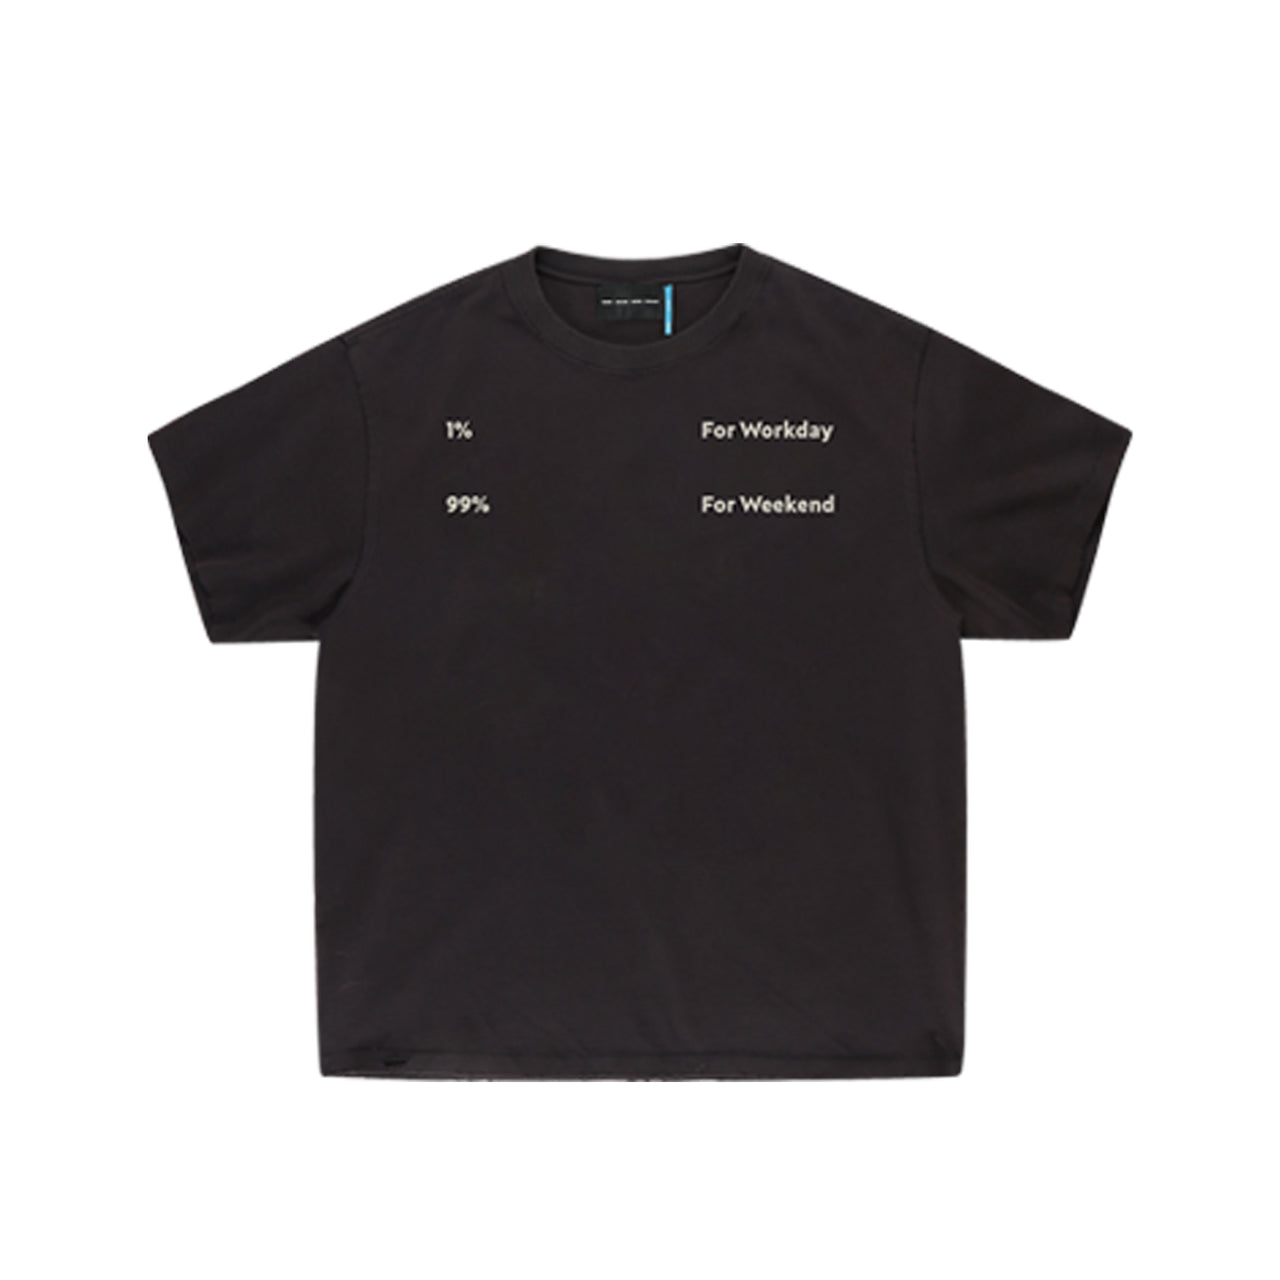 "1% For Workday, 99% For Weekend" Tee in Black